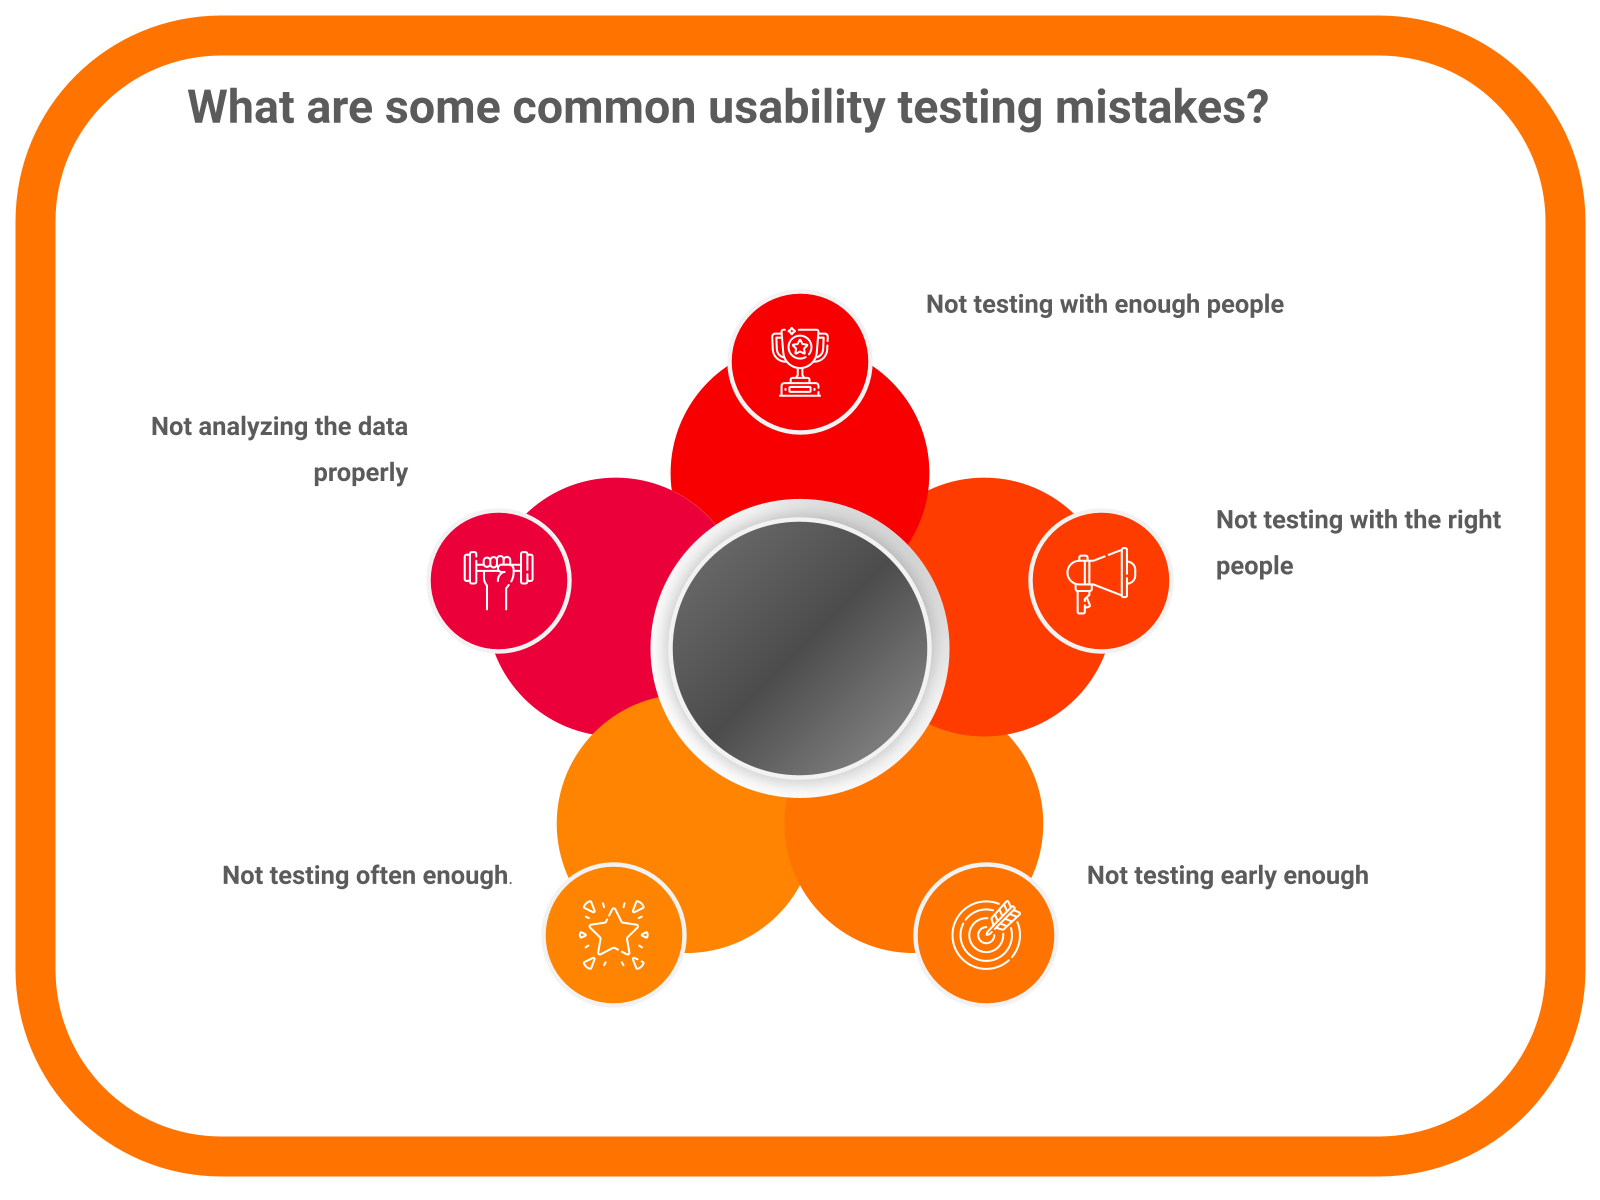 What are some common usability testing mistakes?